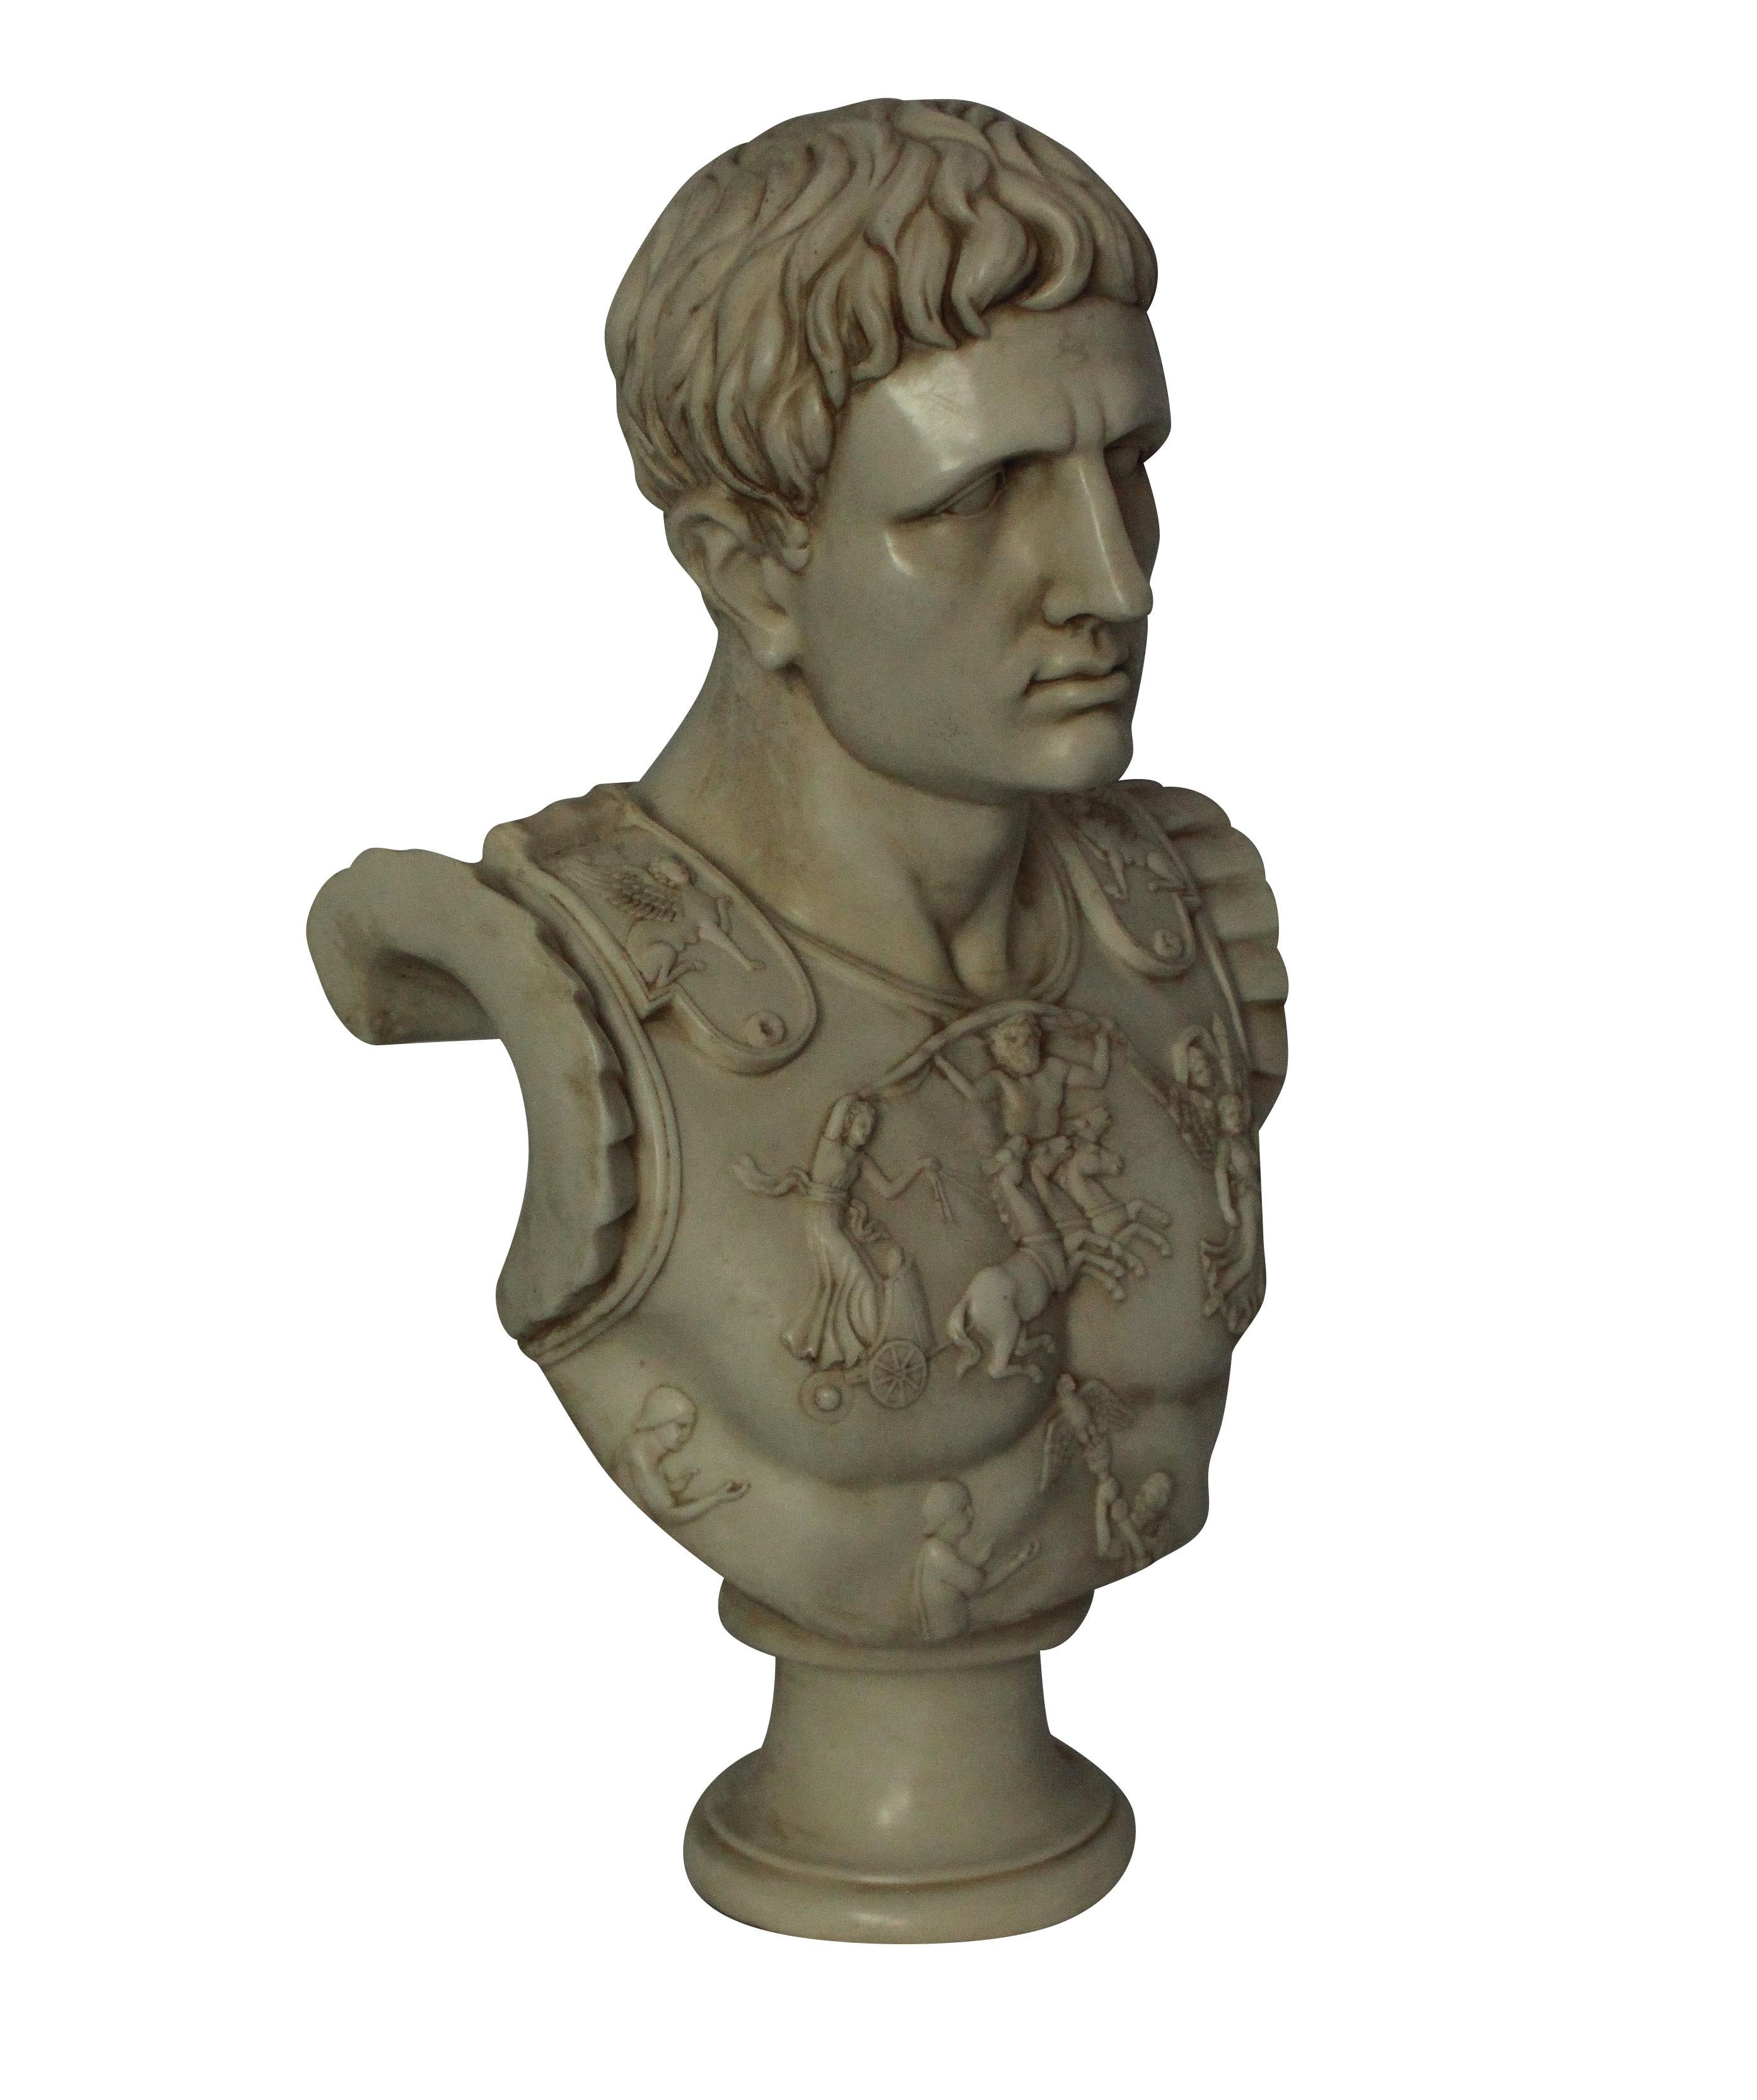 An English composite bust of Caesar Augustus by Redmile.